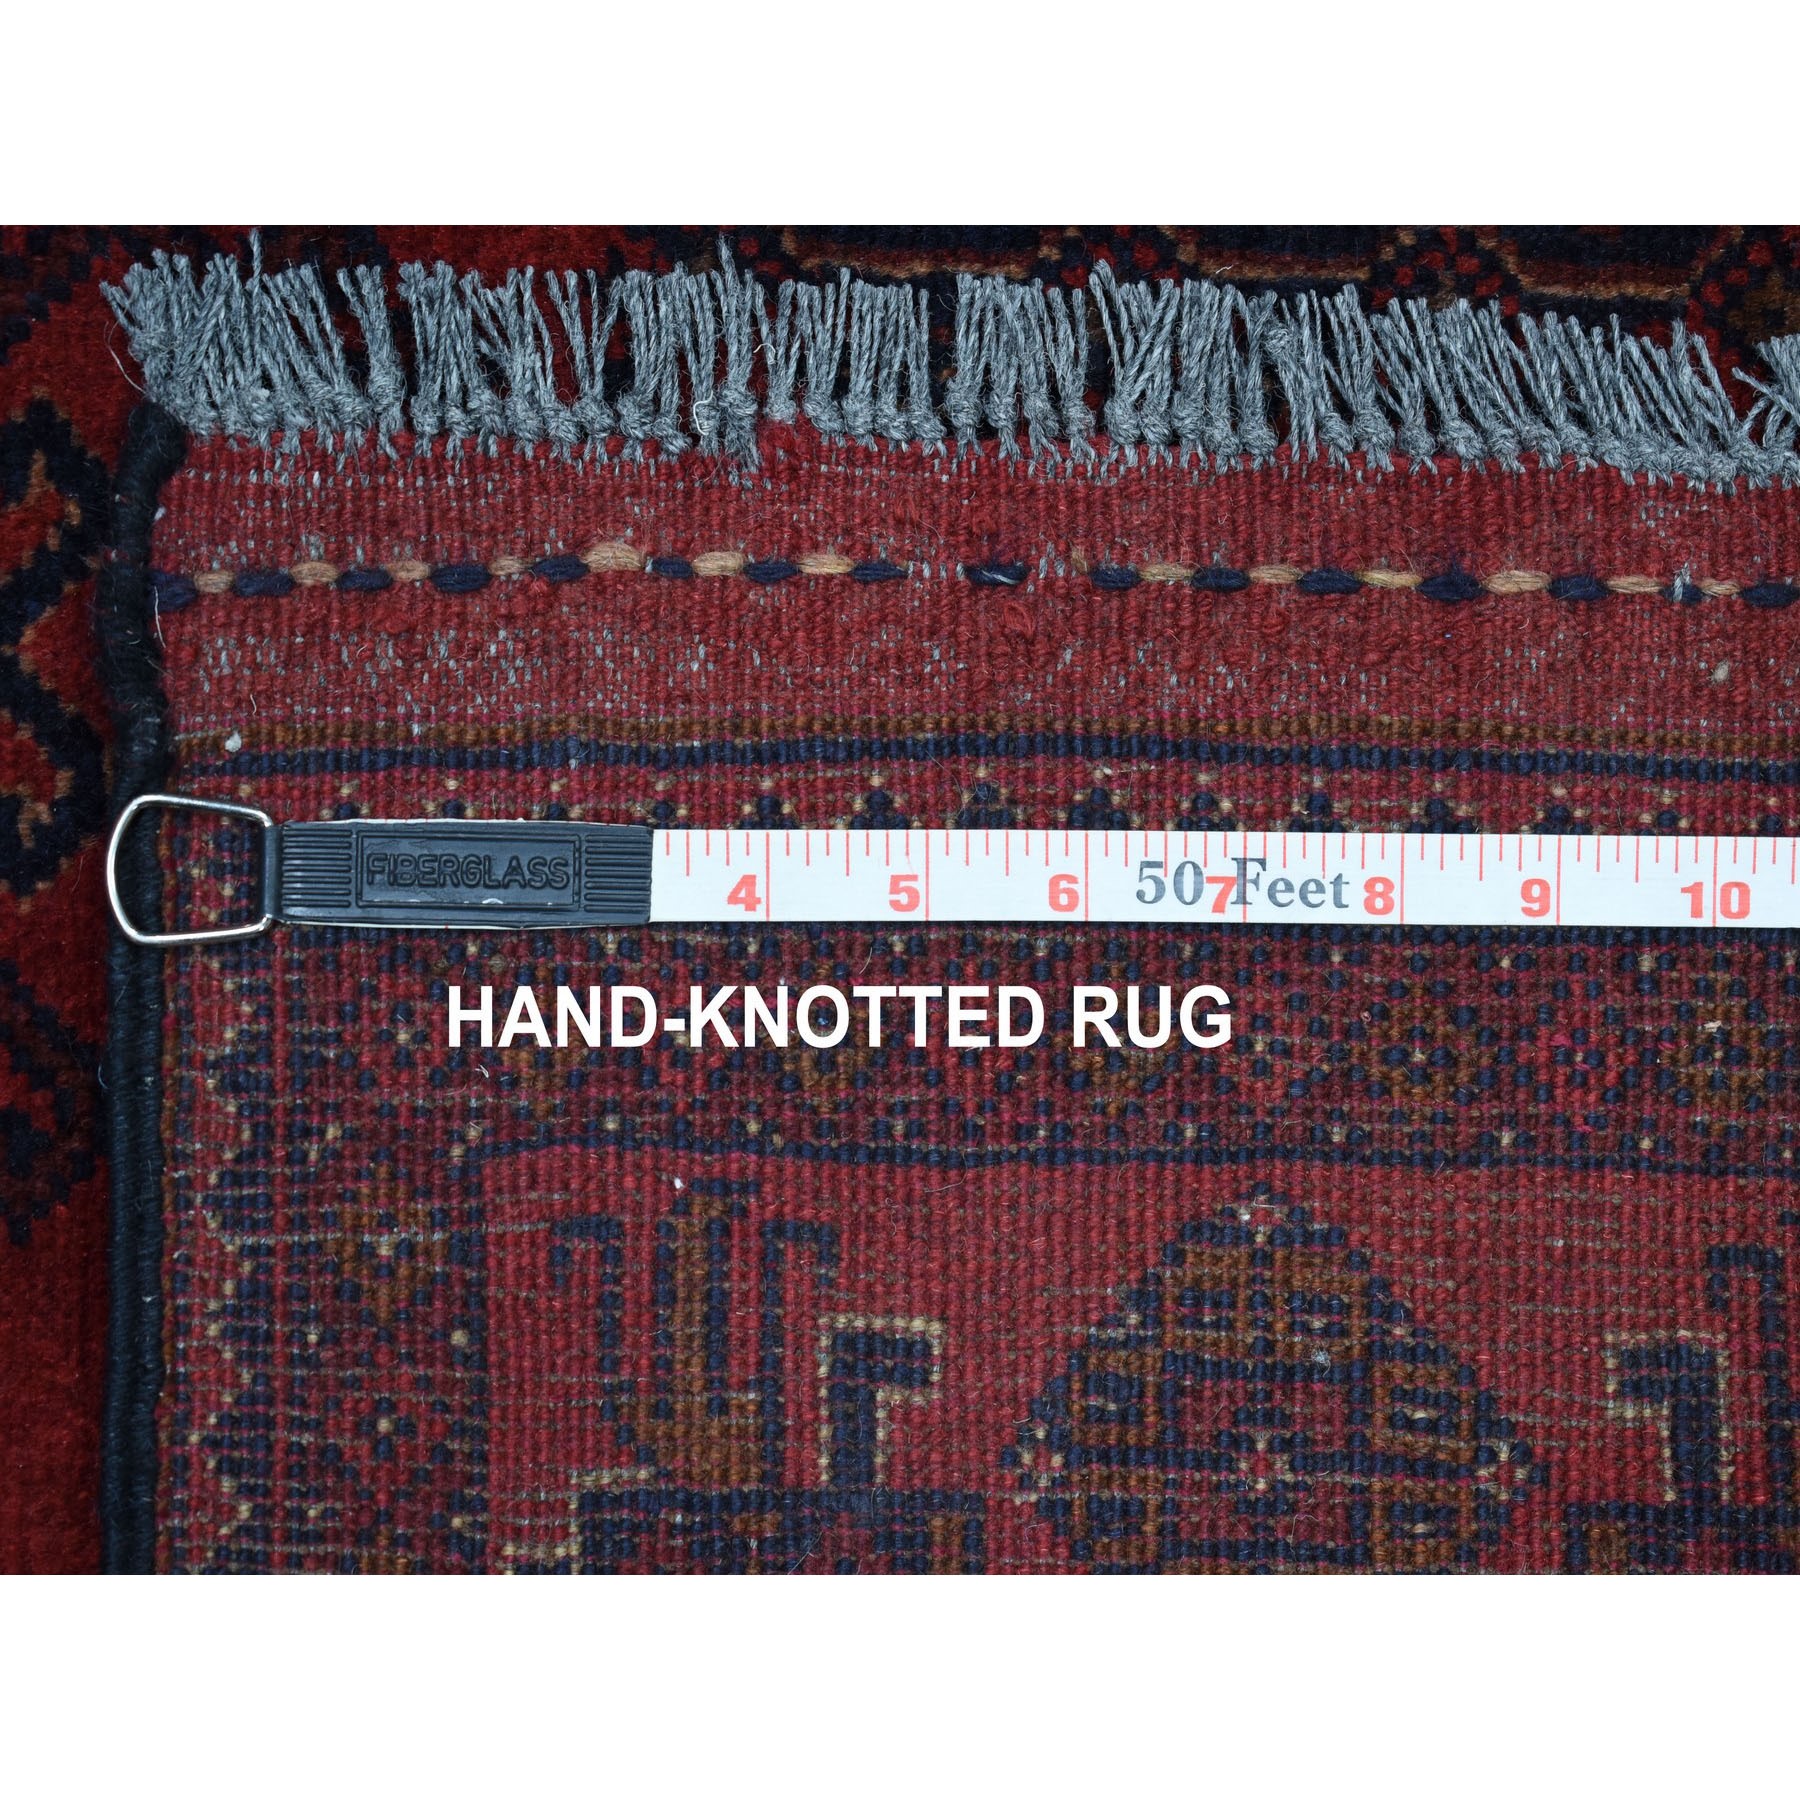 5-x6-3  Deep and Saturated Red Elephant Feet Design Afghan Andkhoy Pure Wool Hand-Knotted Oriental Rug 